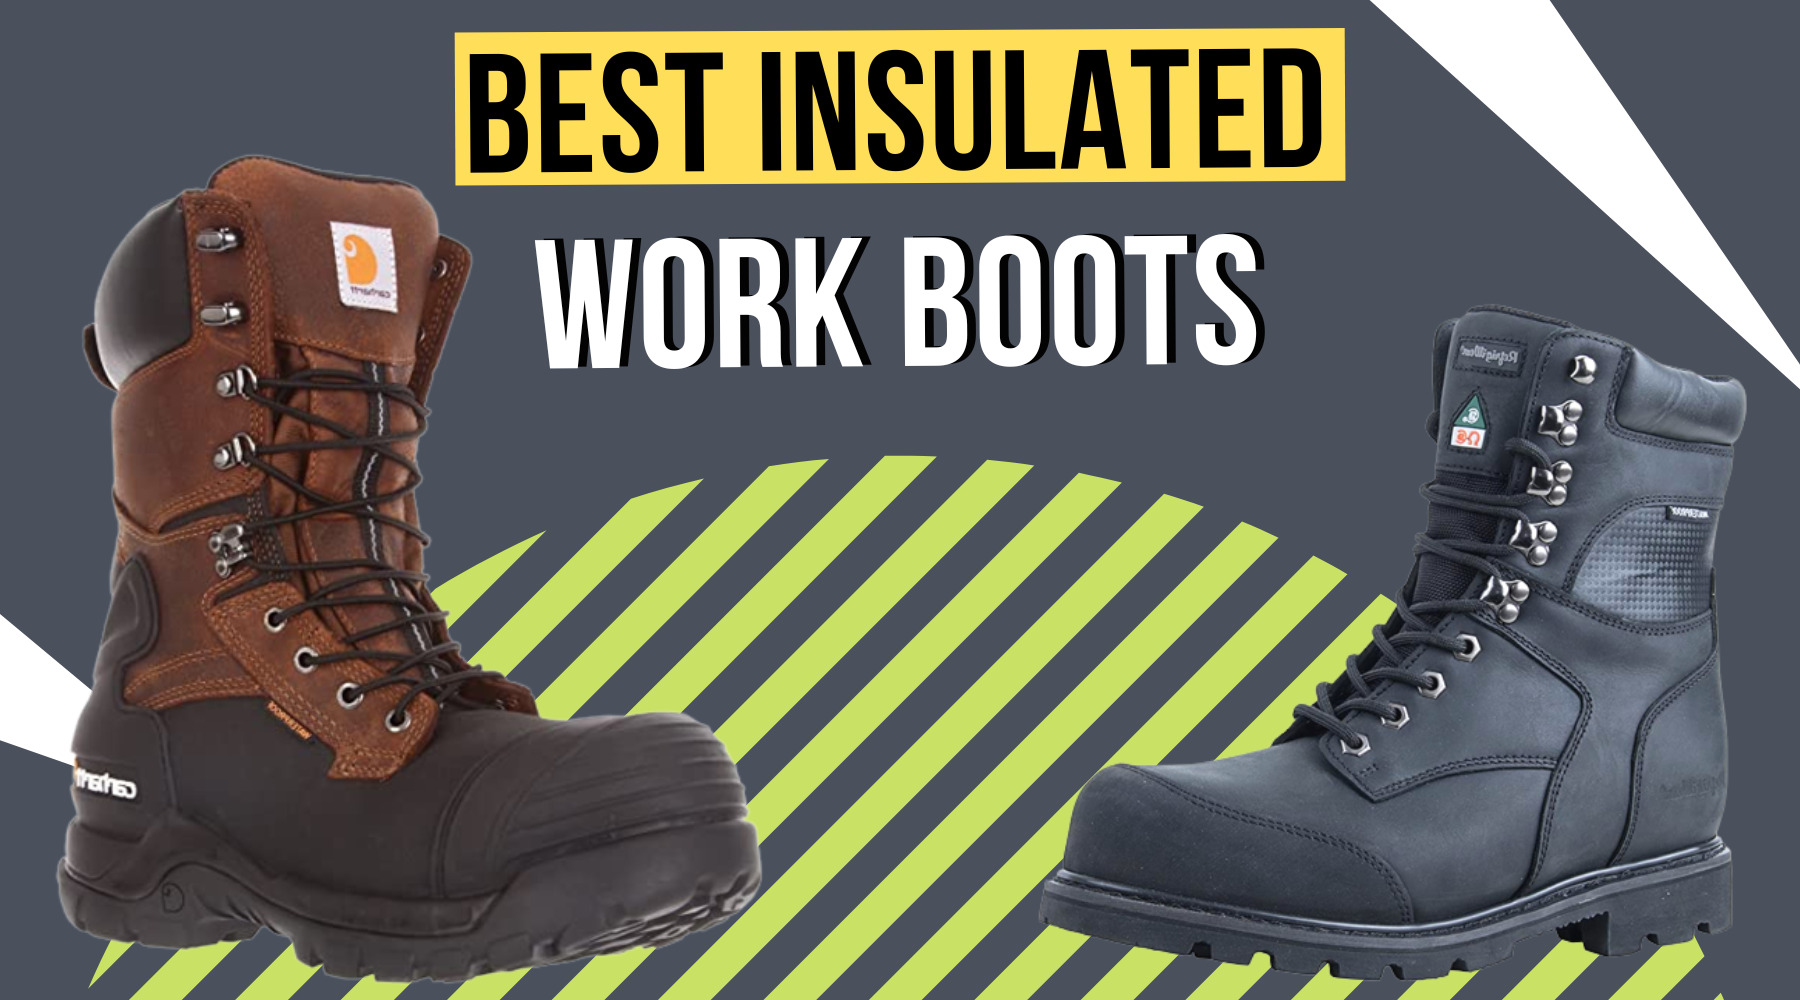 Best Insulated Work Boot For Winter & Extreme Cold